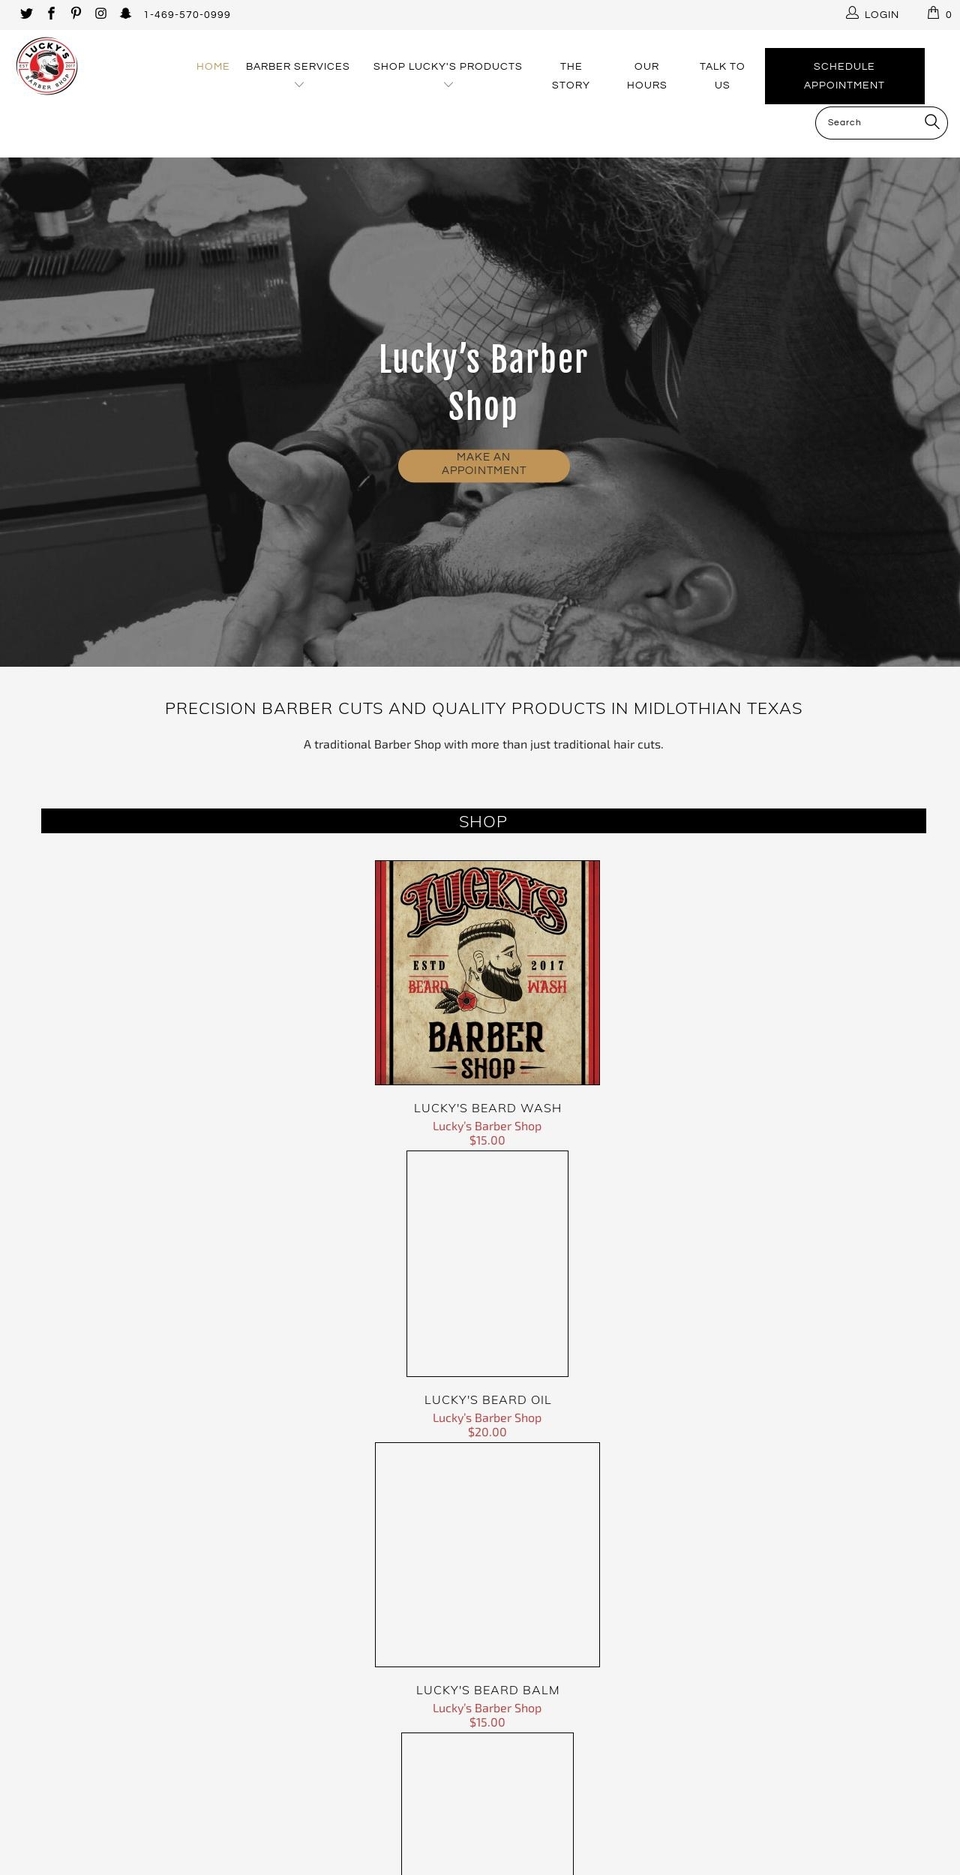 space Shopify theme site example luckysbarbershops.co